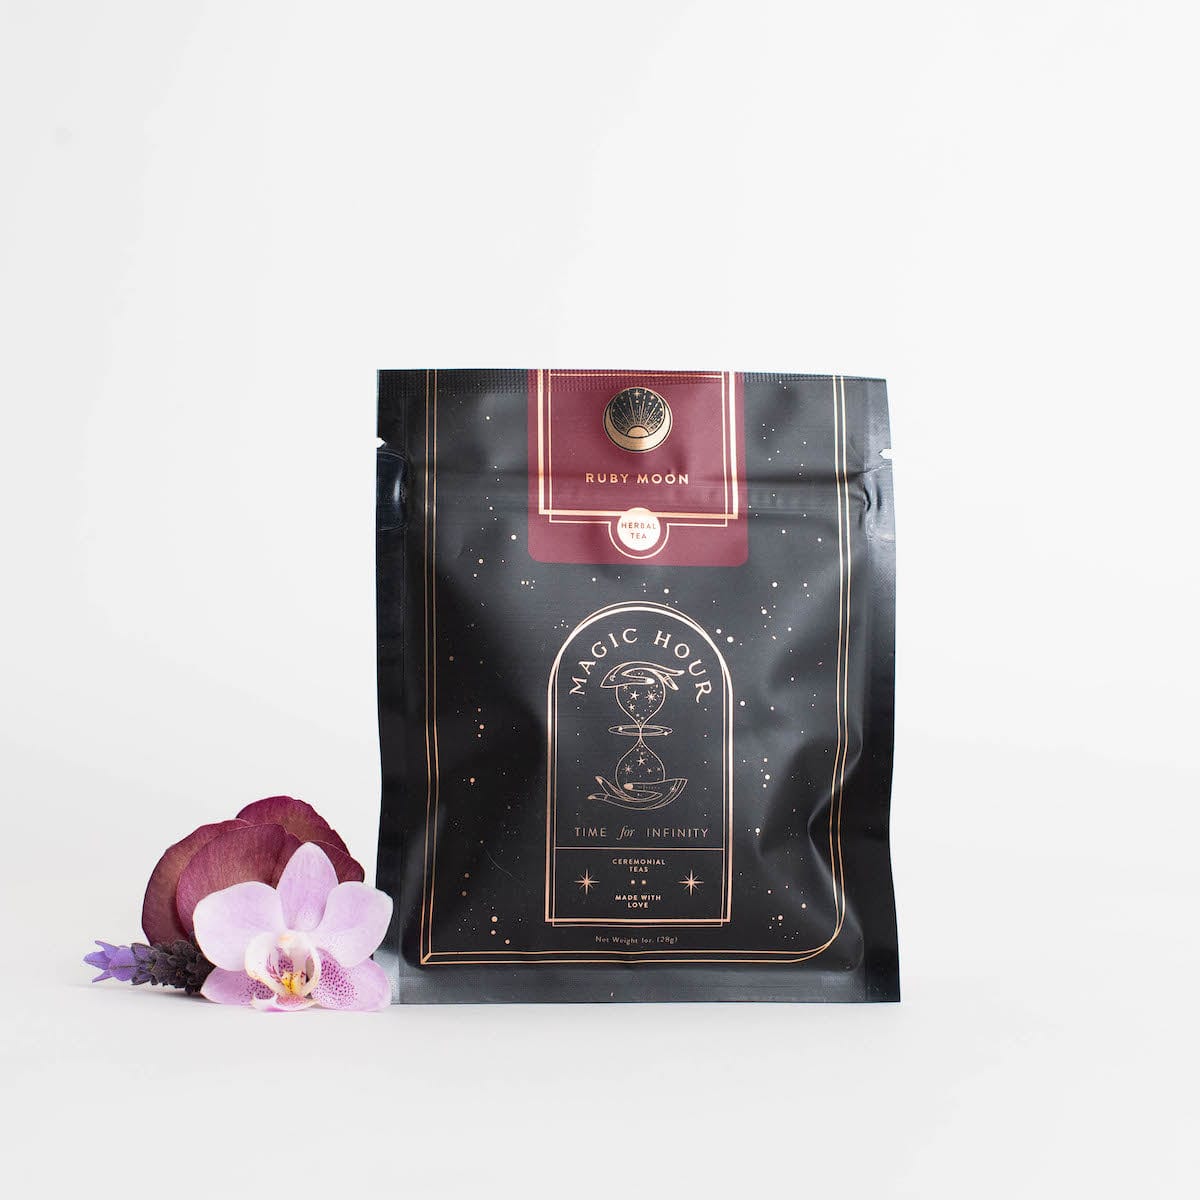 A black and gold pouch labeled &quot;Ruby Moon™ : Hibiscus Elderberry Tea&quot; rests against a white background. The pouch, containing organic loose leaf tea by Club Magic Hour, features galaxy-themed designs. Beside it lies a small arrangement of purple and white orchids.